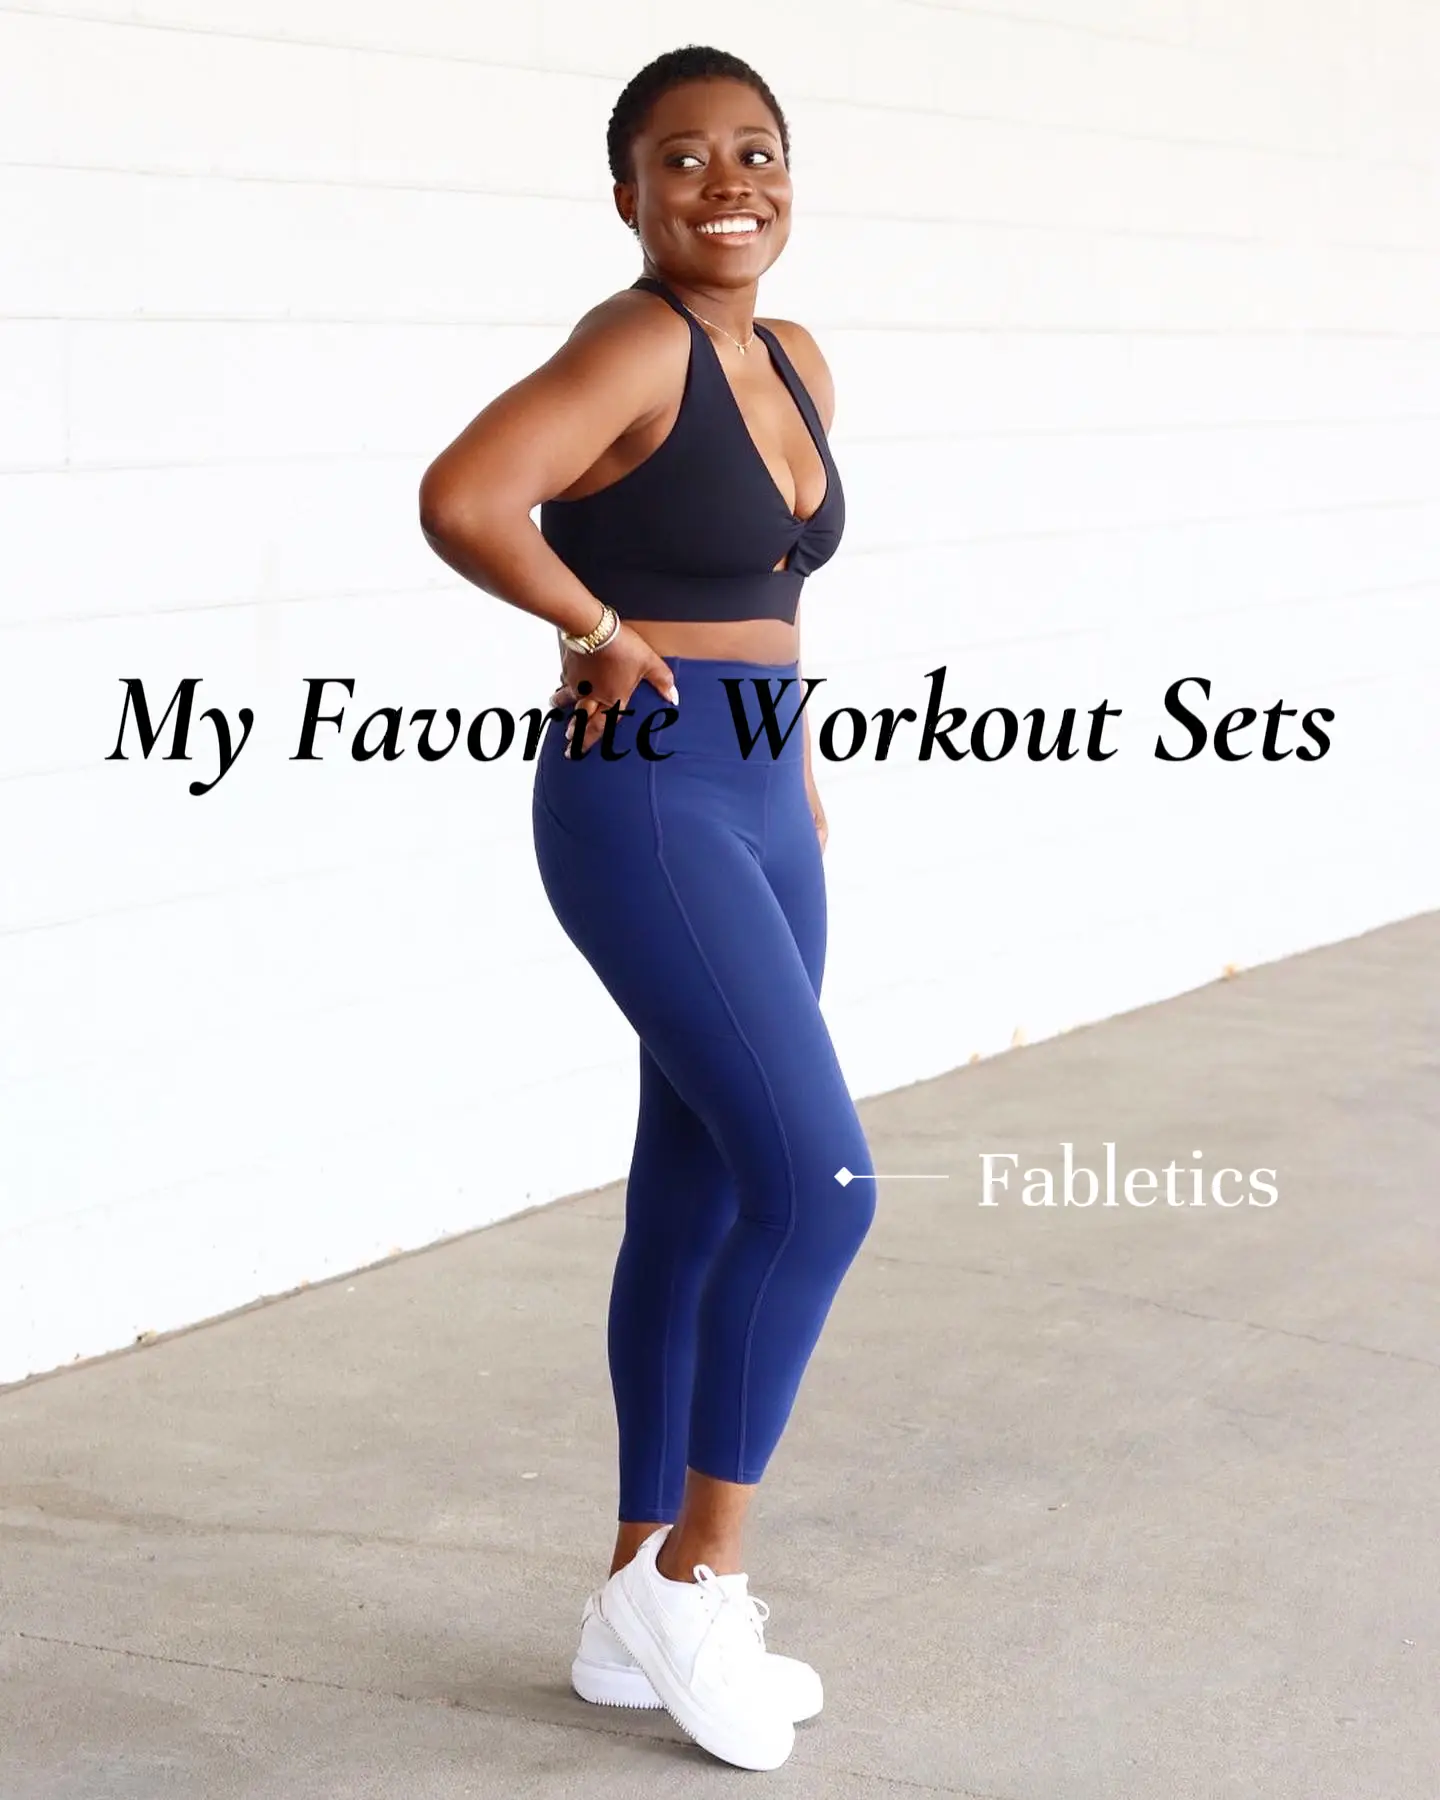 Some of My Favorite Workout Sets 